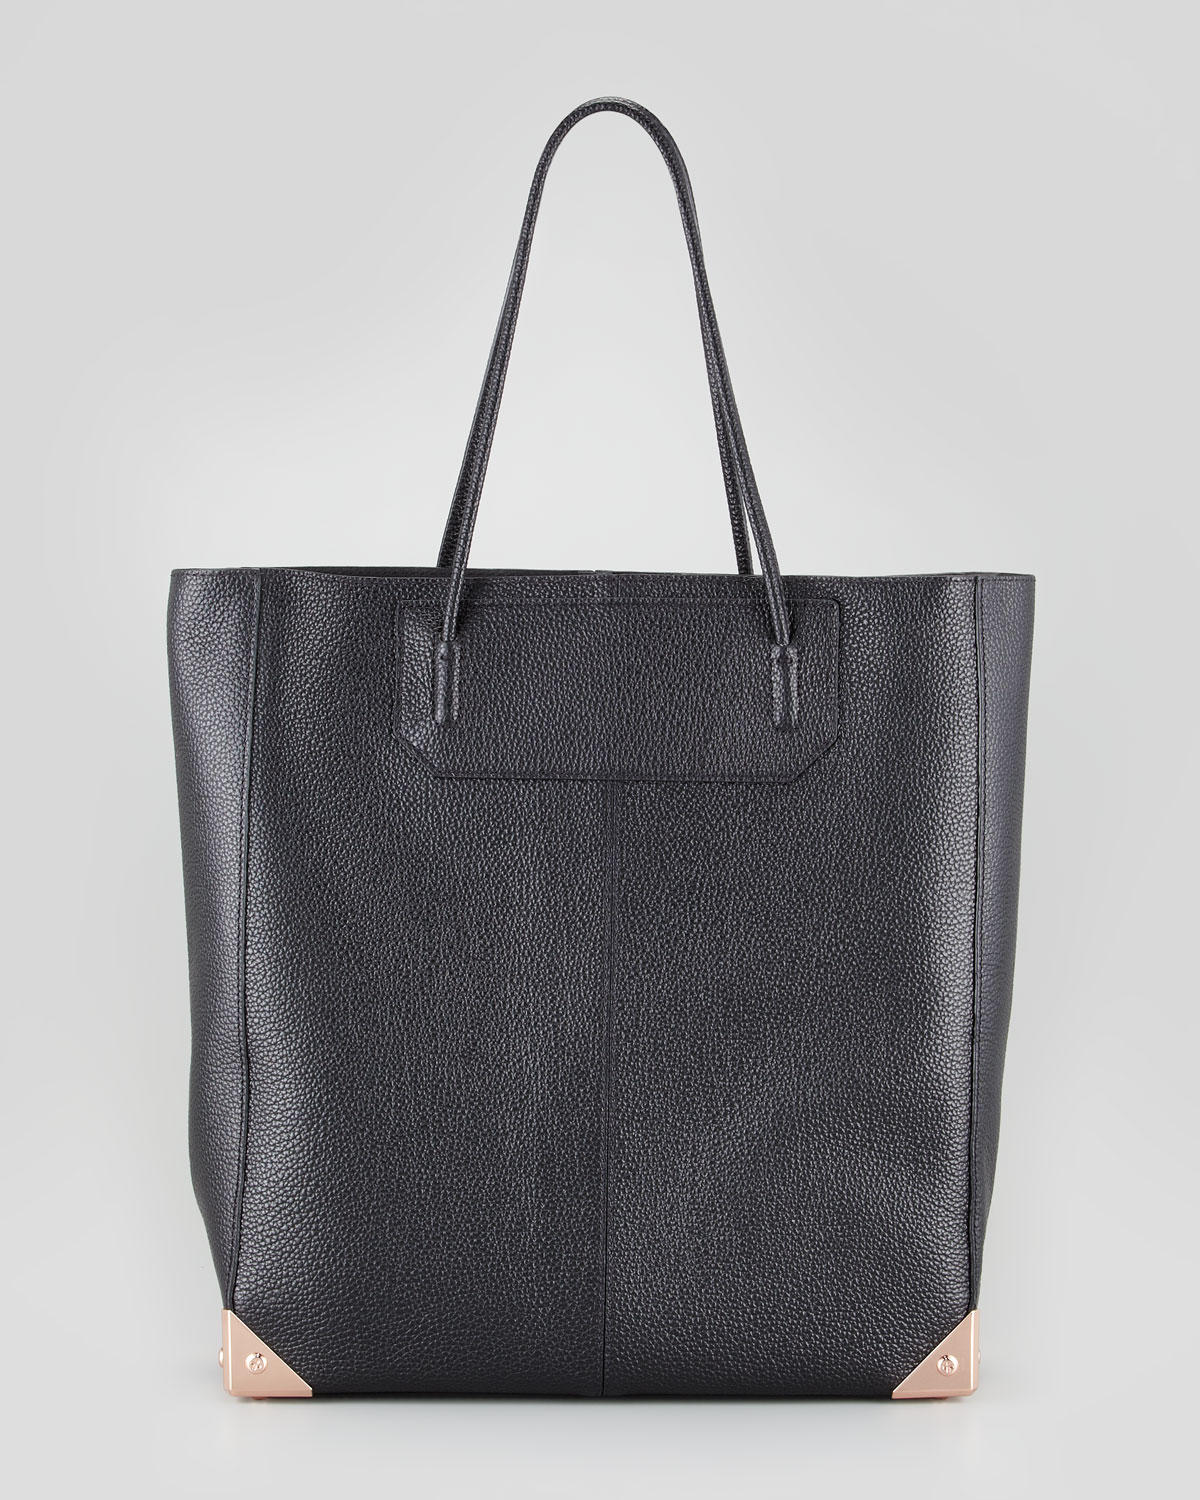 Alexander Wang Prisma Pebbled Leather Tote Bag in Black | Lyst